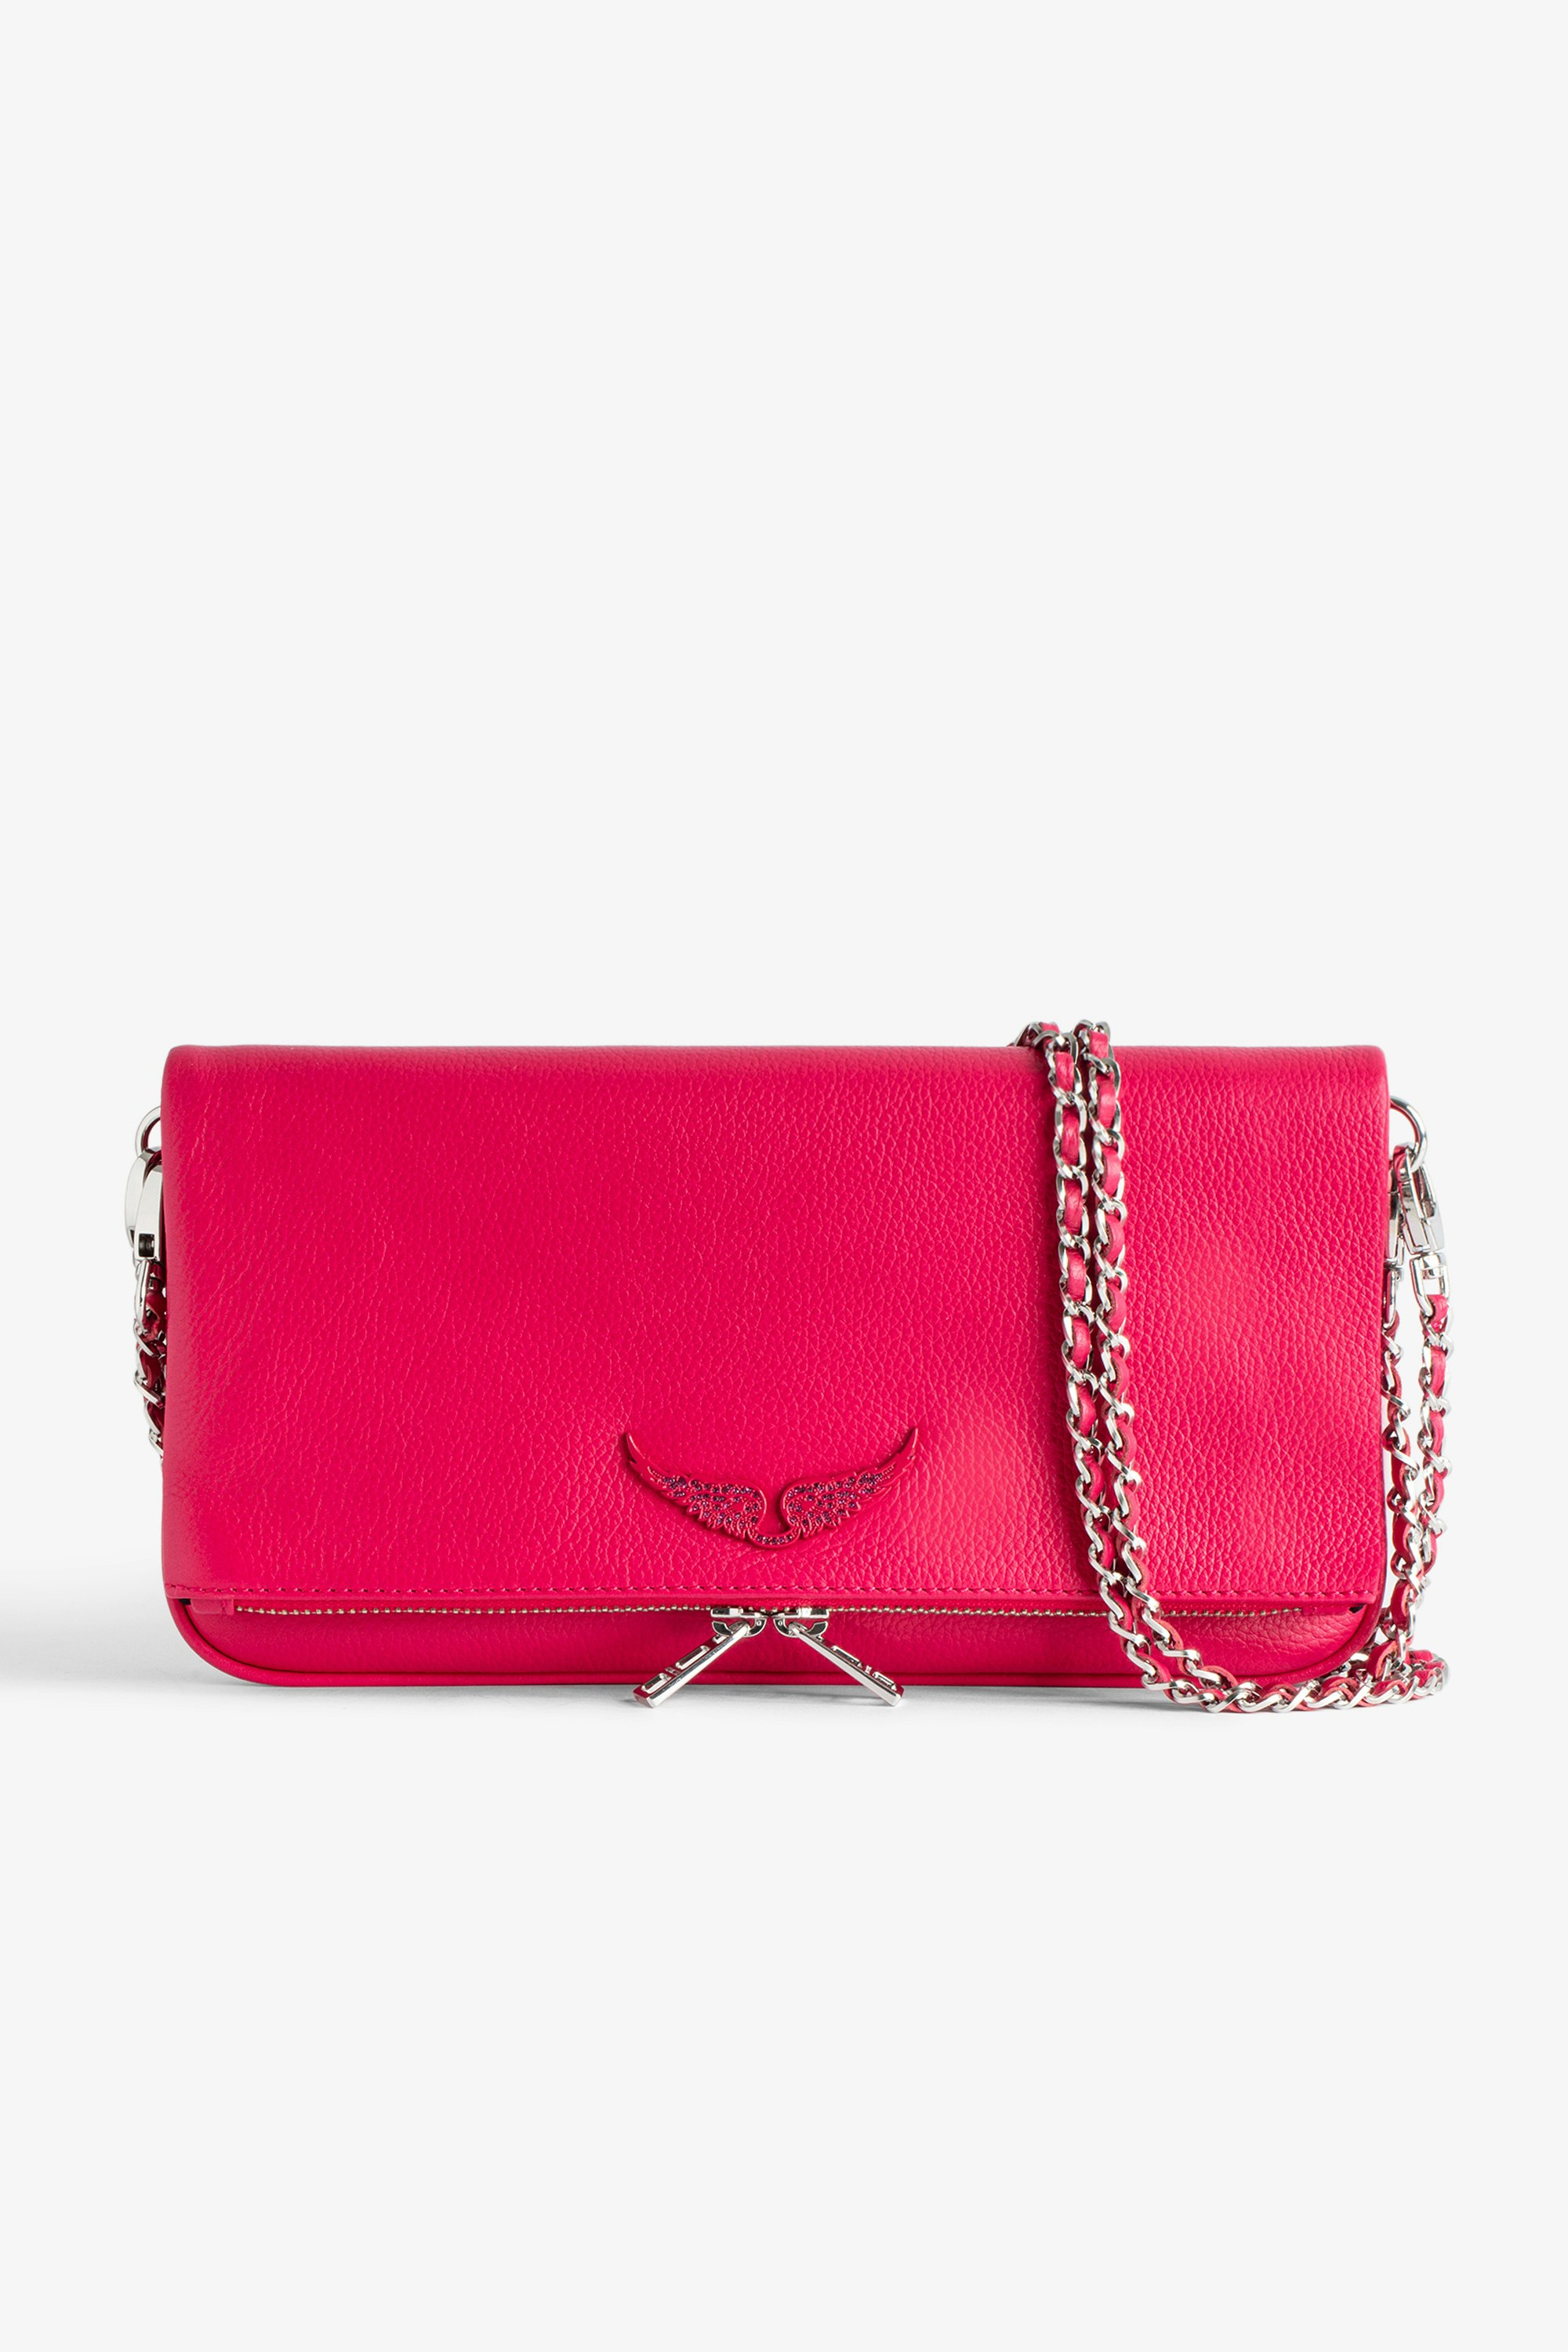 Rock Clutch - Women’s pink grained leather clutch bag with double leather and metal chain strap.